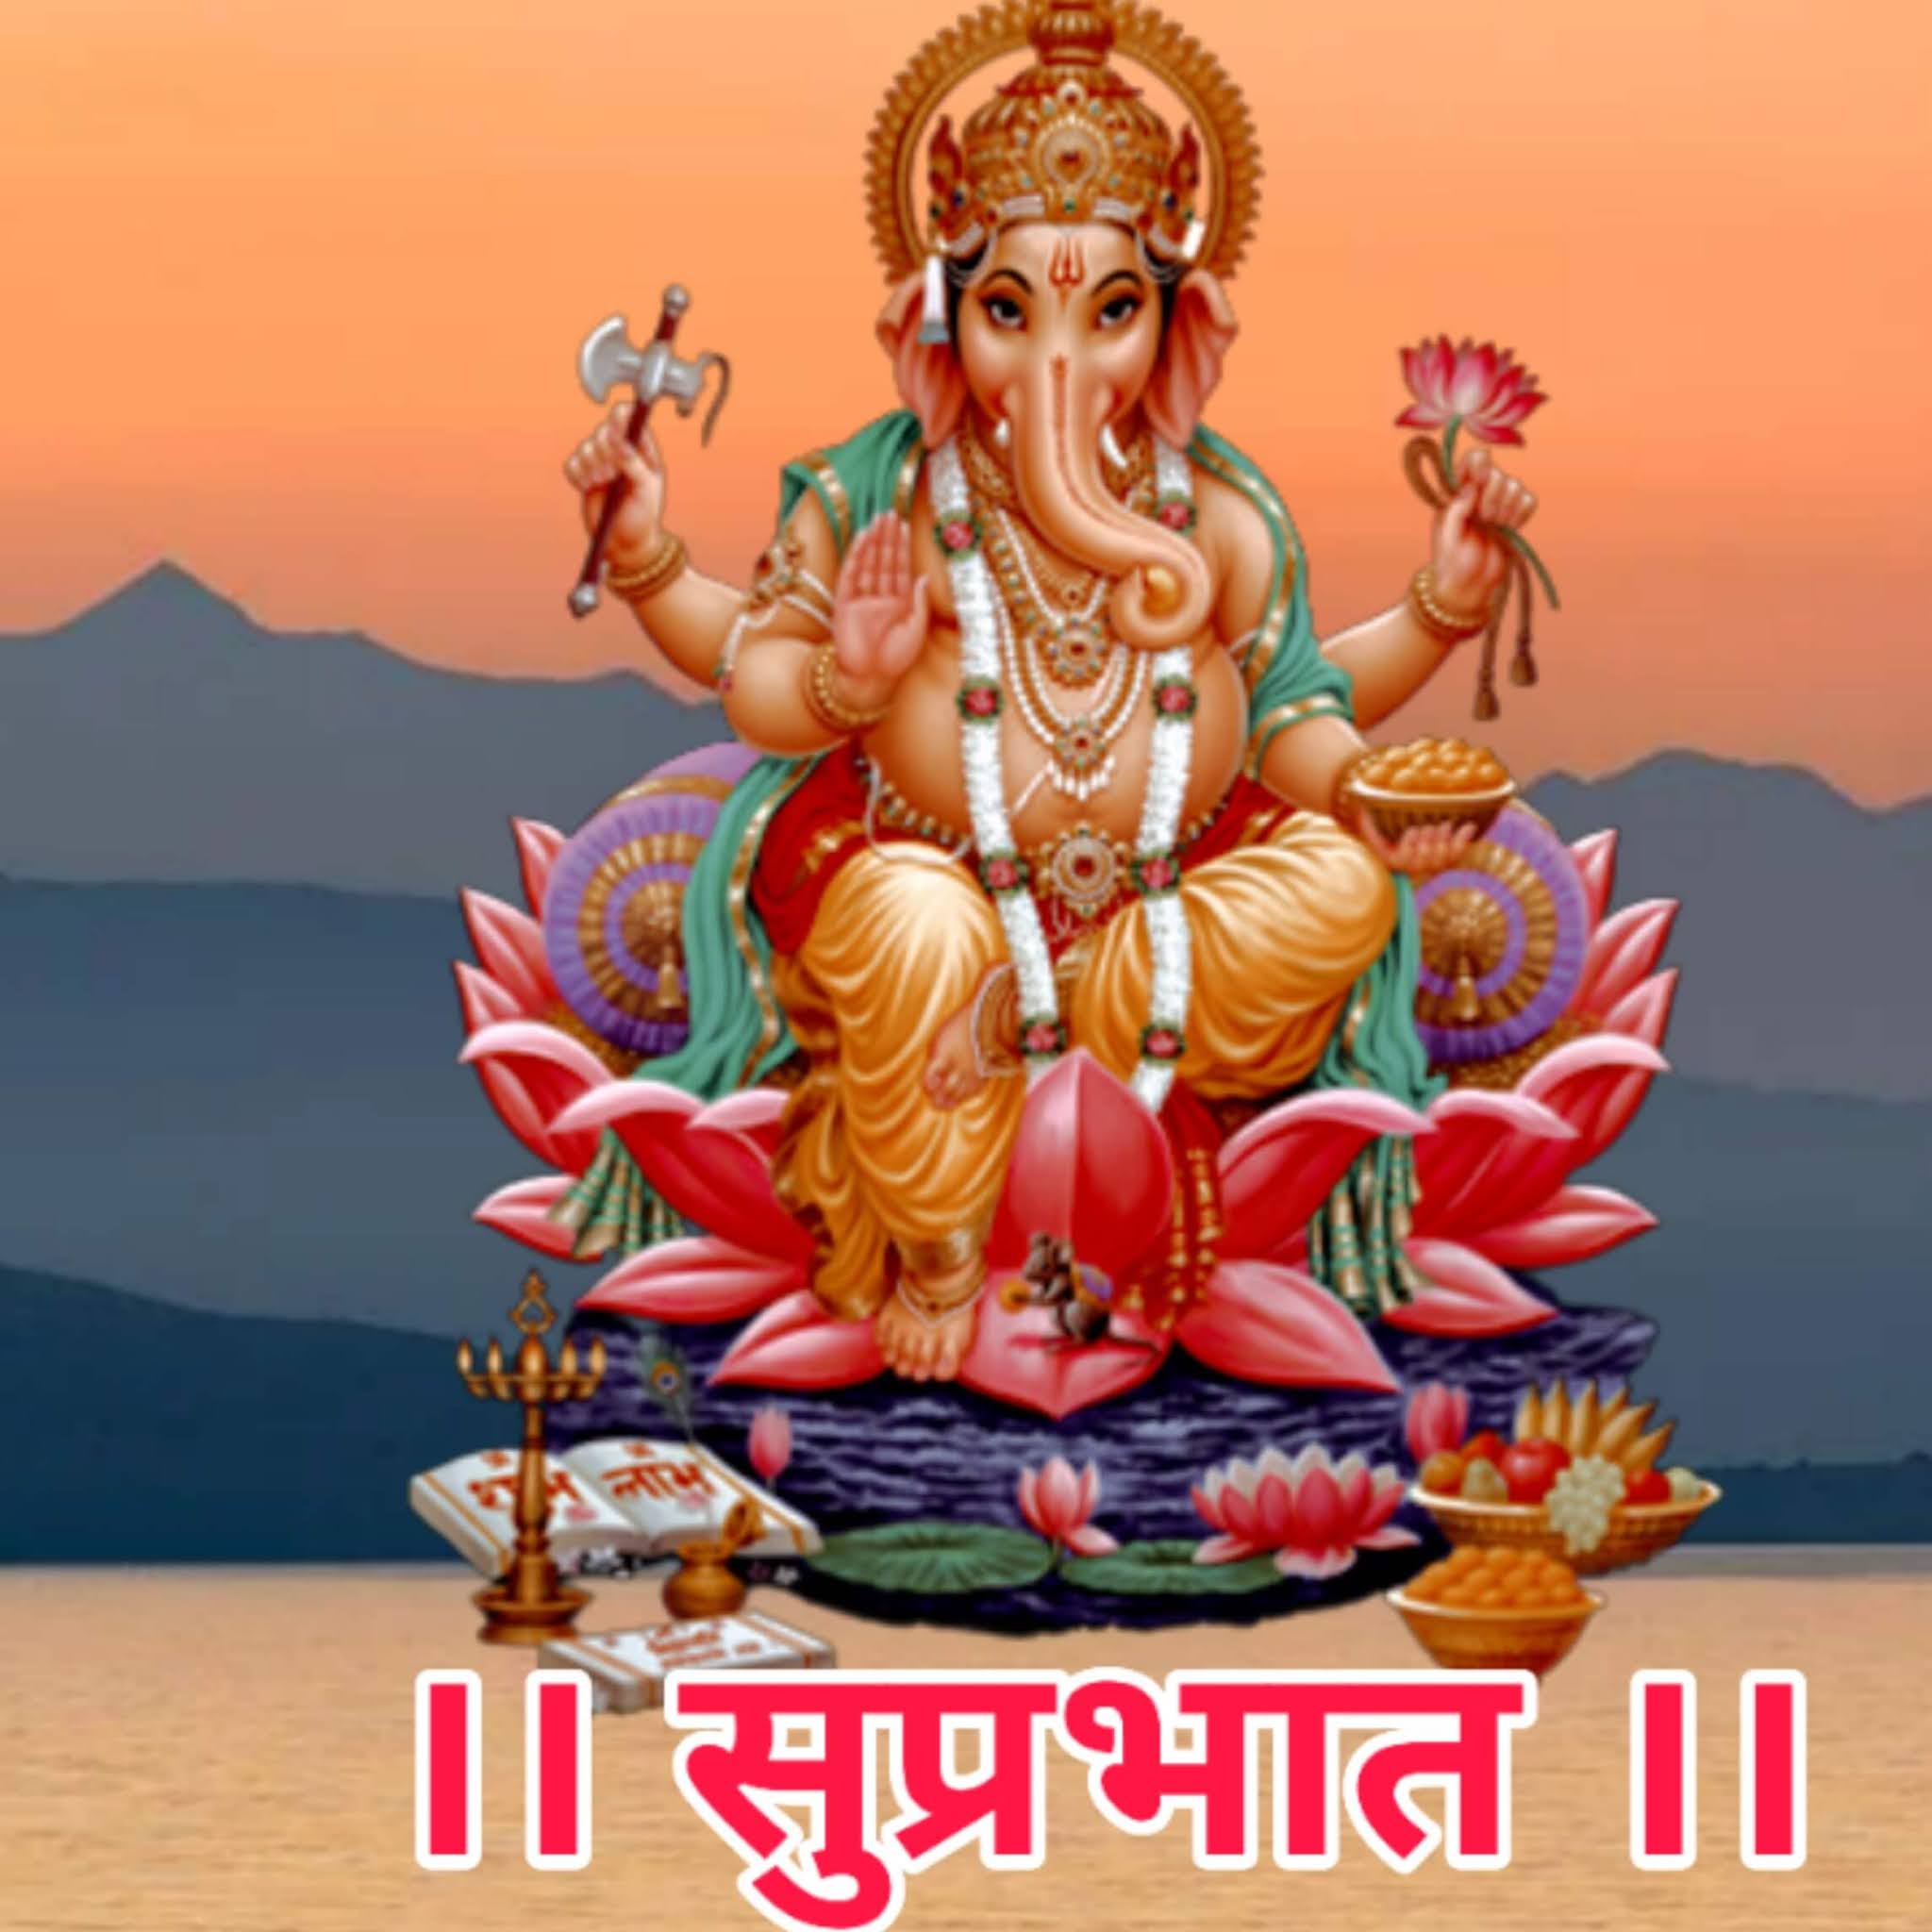 Good Morning God Images Photos Pictures Wallpaper Free Download Best Wishes Image